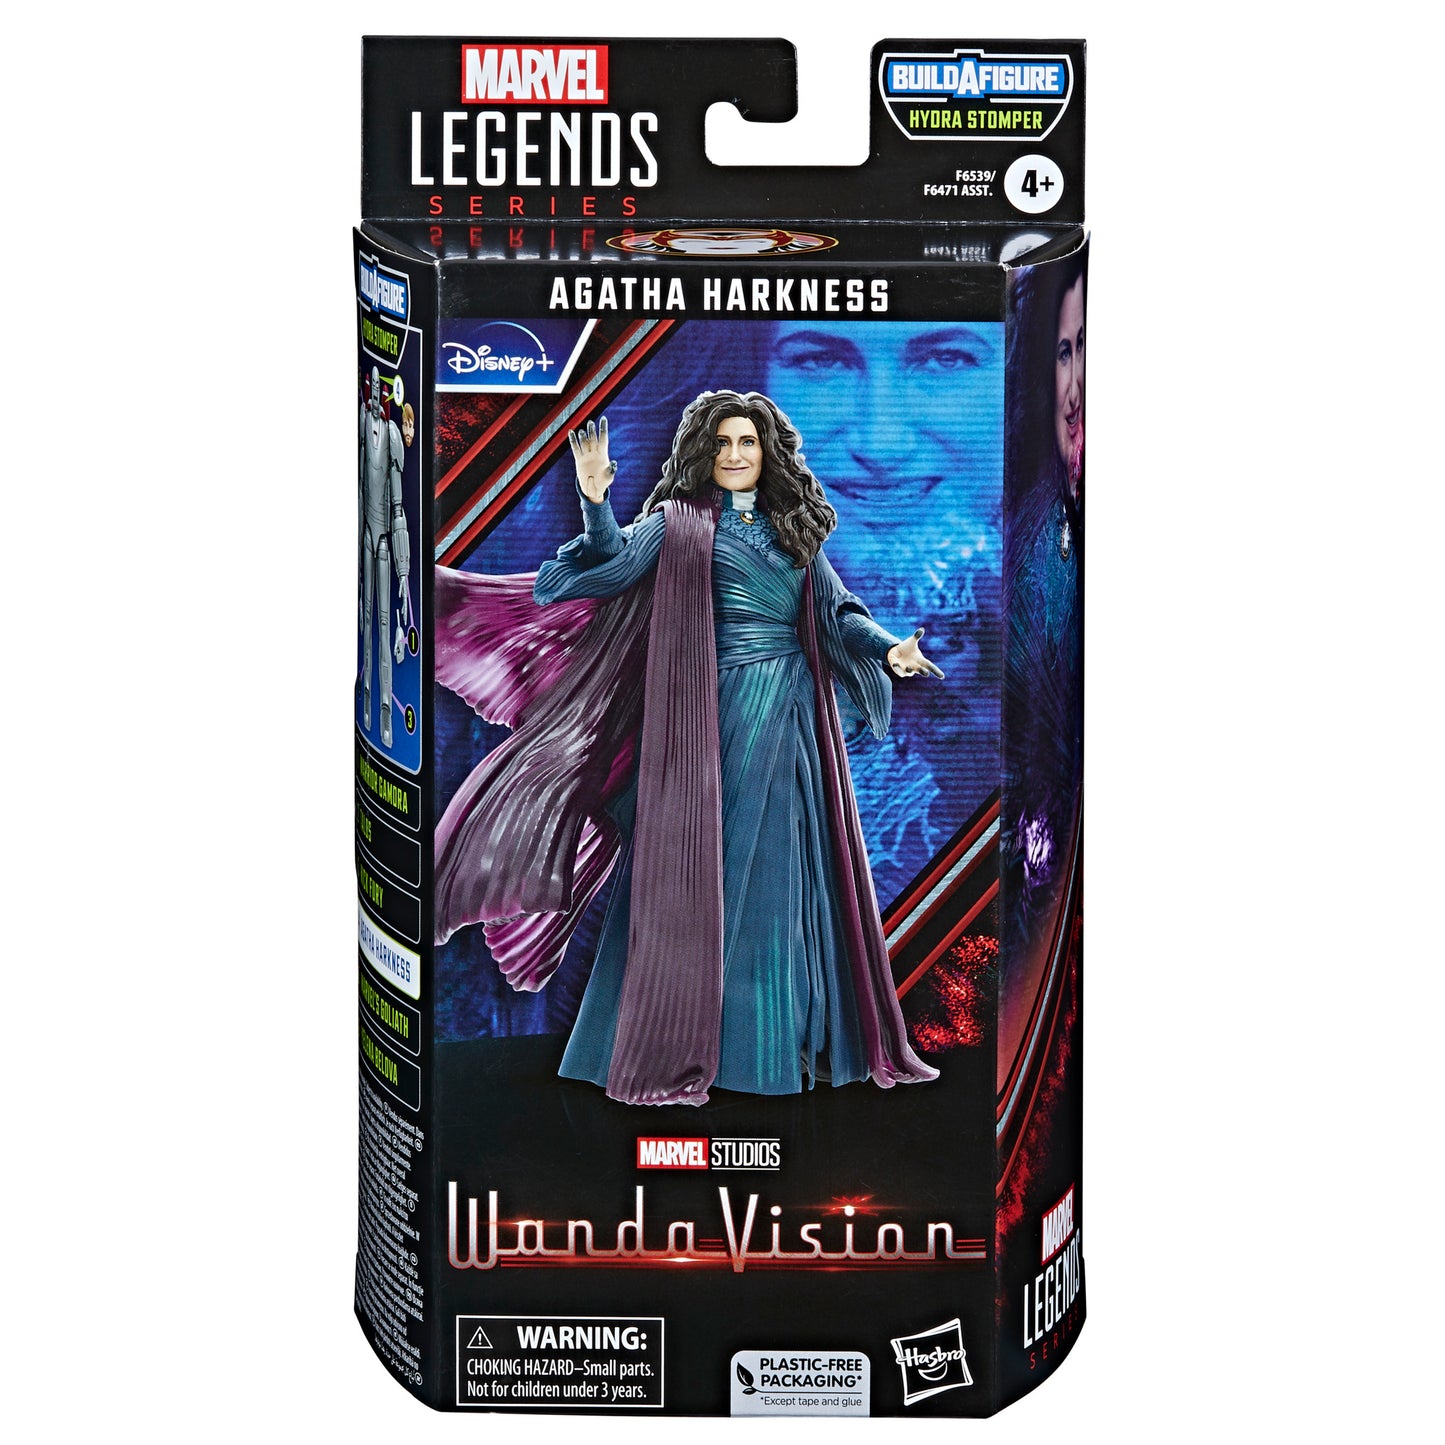 Agatha Harkness Action Figure  in a box front view - Heretoserveyou